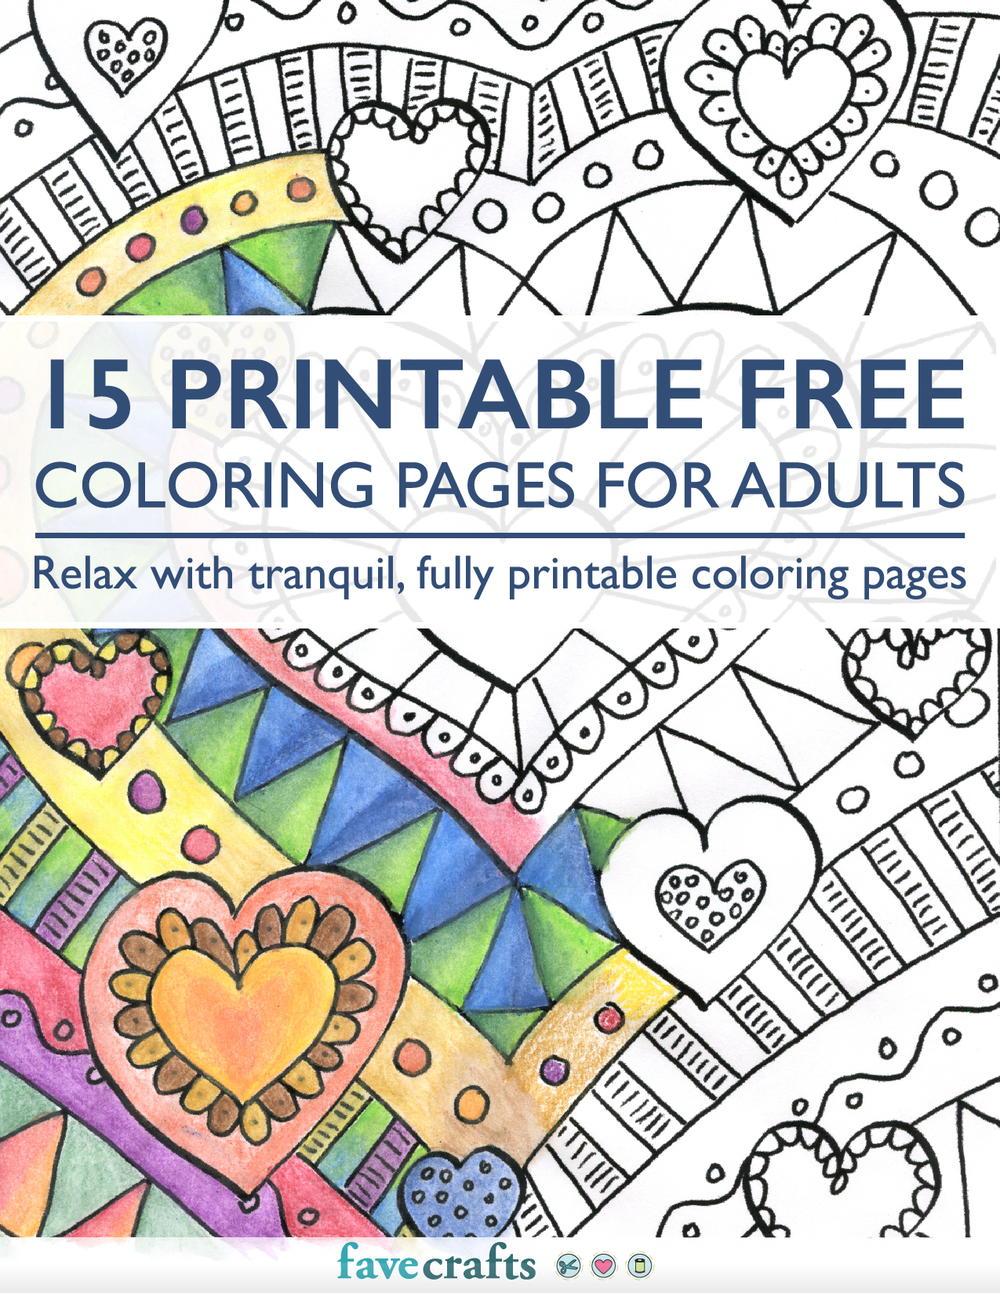 15 Printable Free Coloring Pages for Adults PDF